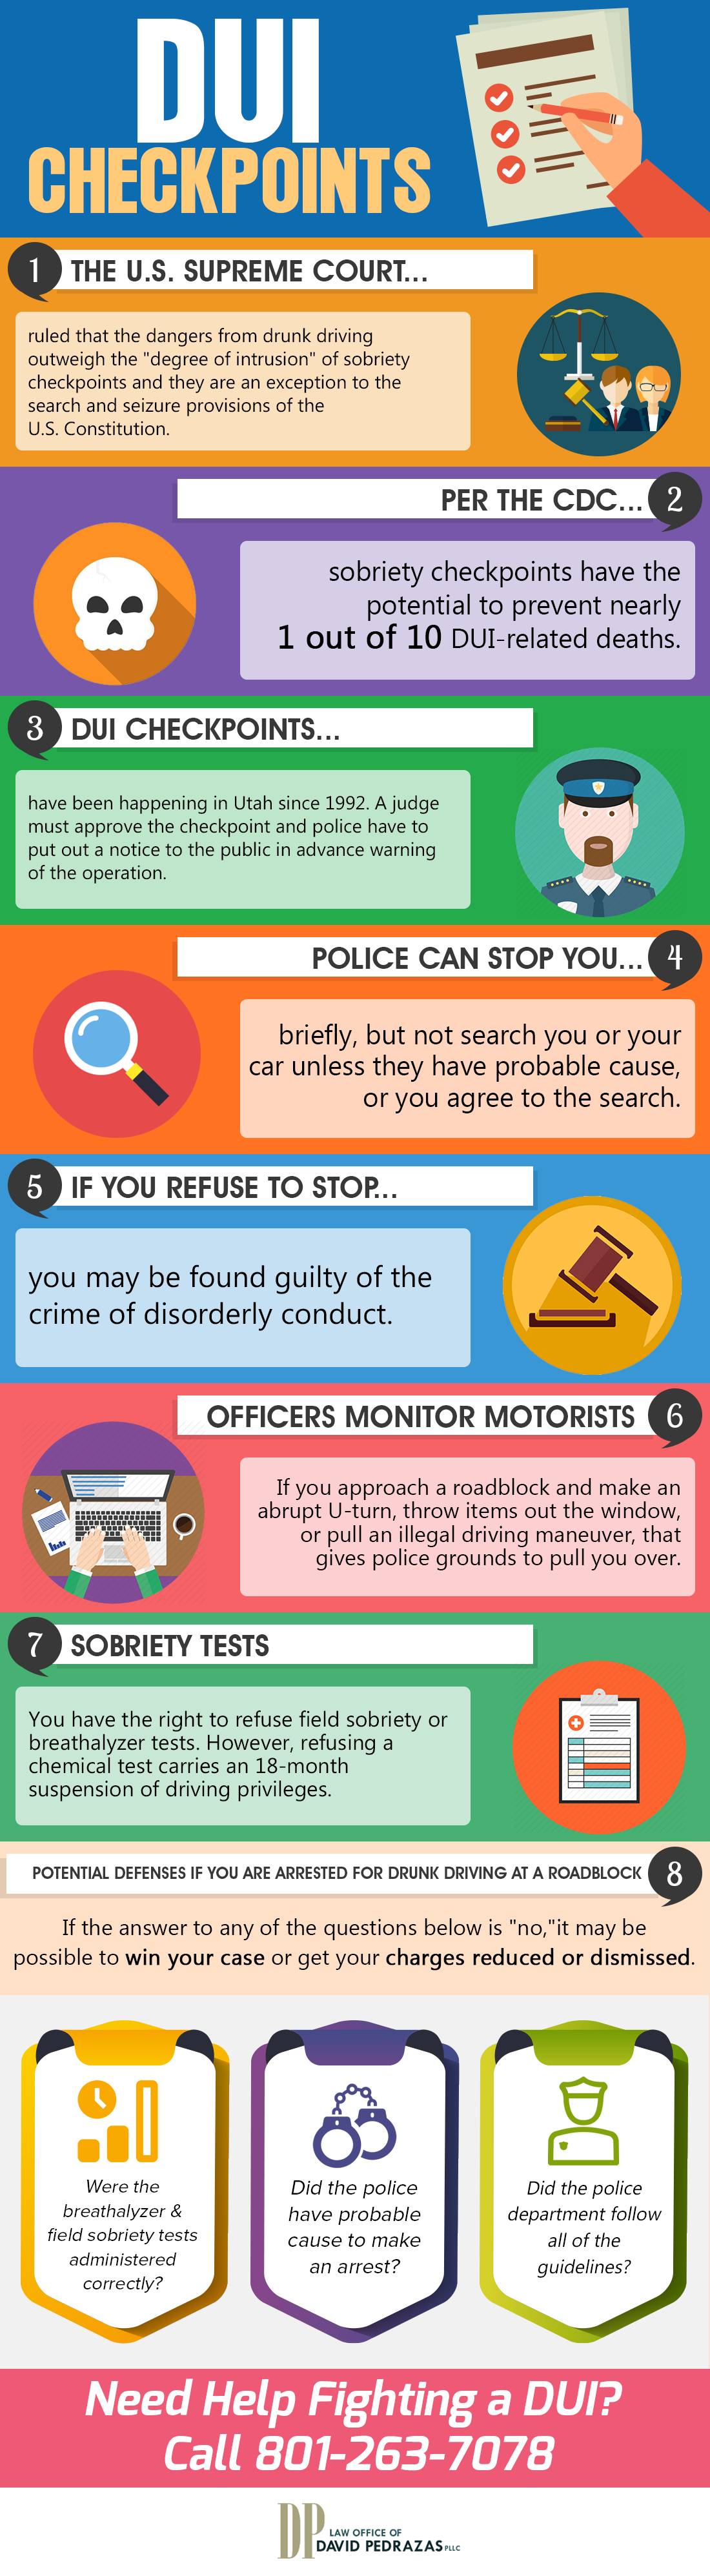 dui checkpoint infographic